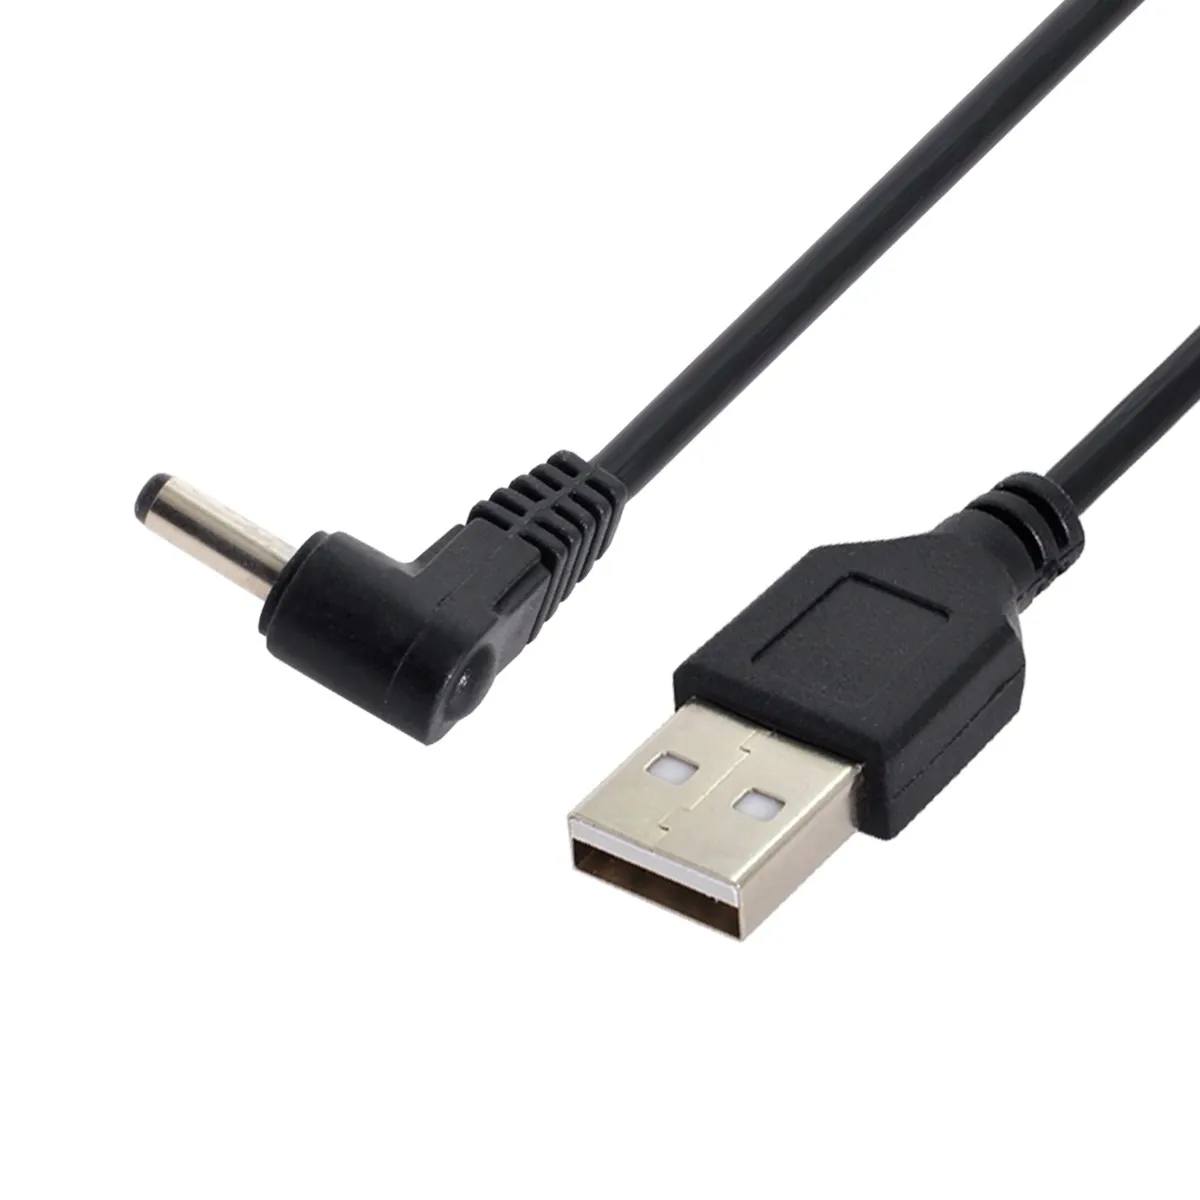 

Chenyang Right Angled 90 Degree 3.5mm 1.35mm DC power Plug Barrel 5v to USB 2.0 Male Cable 100cm